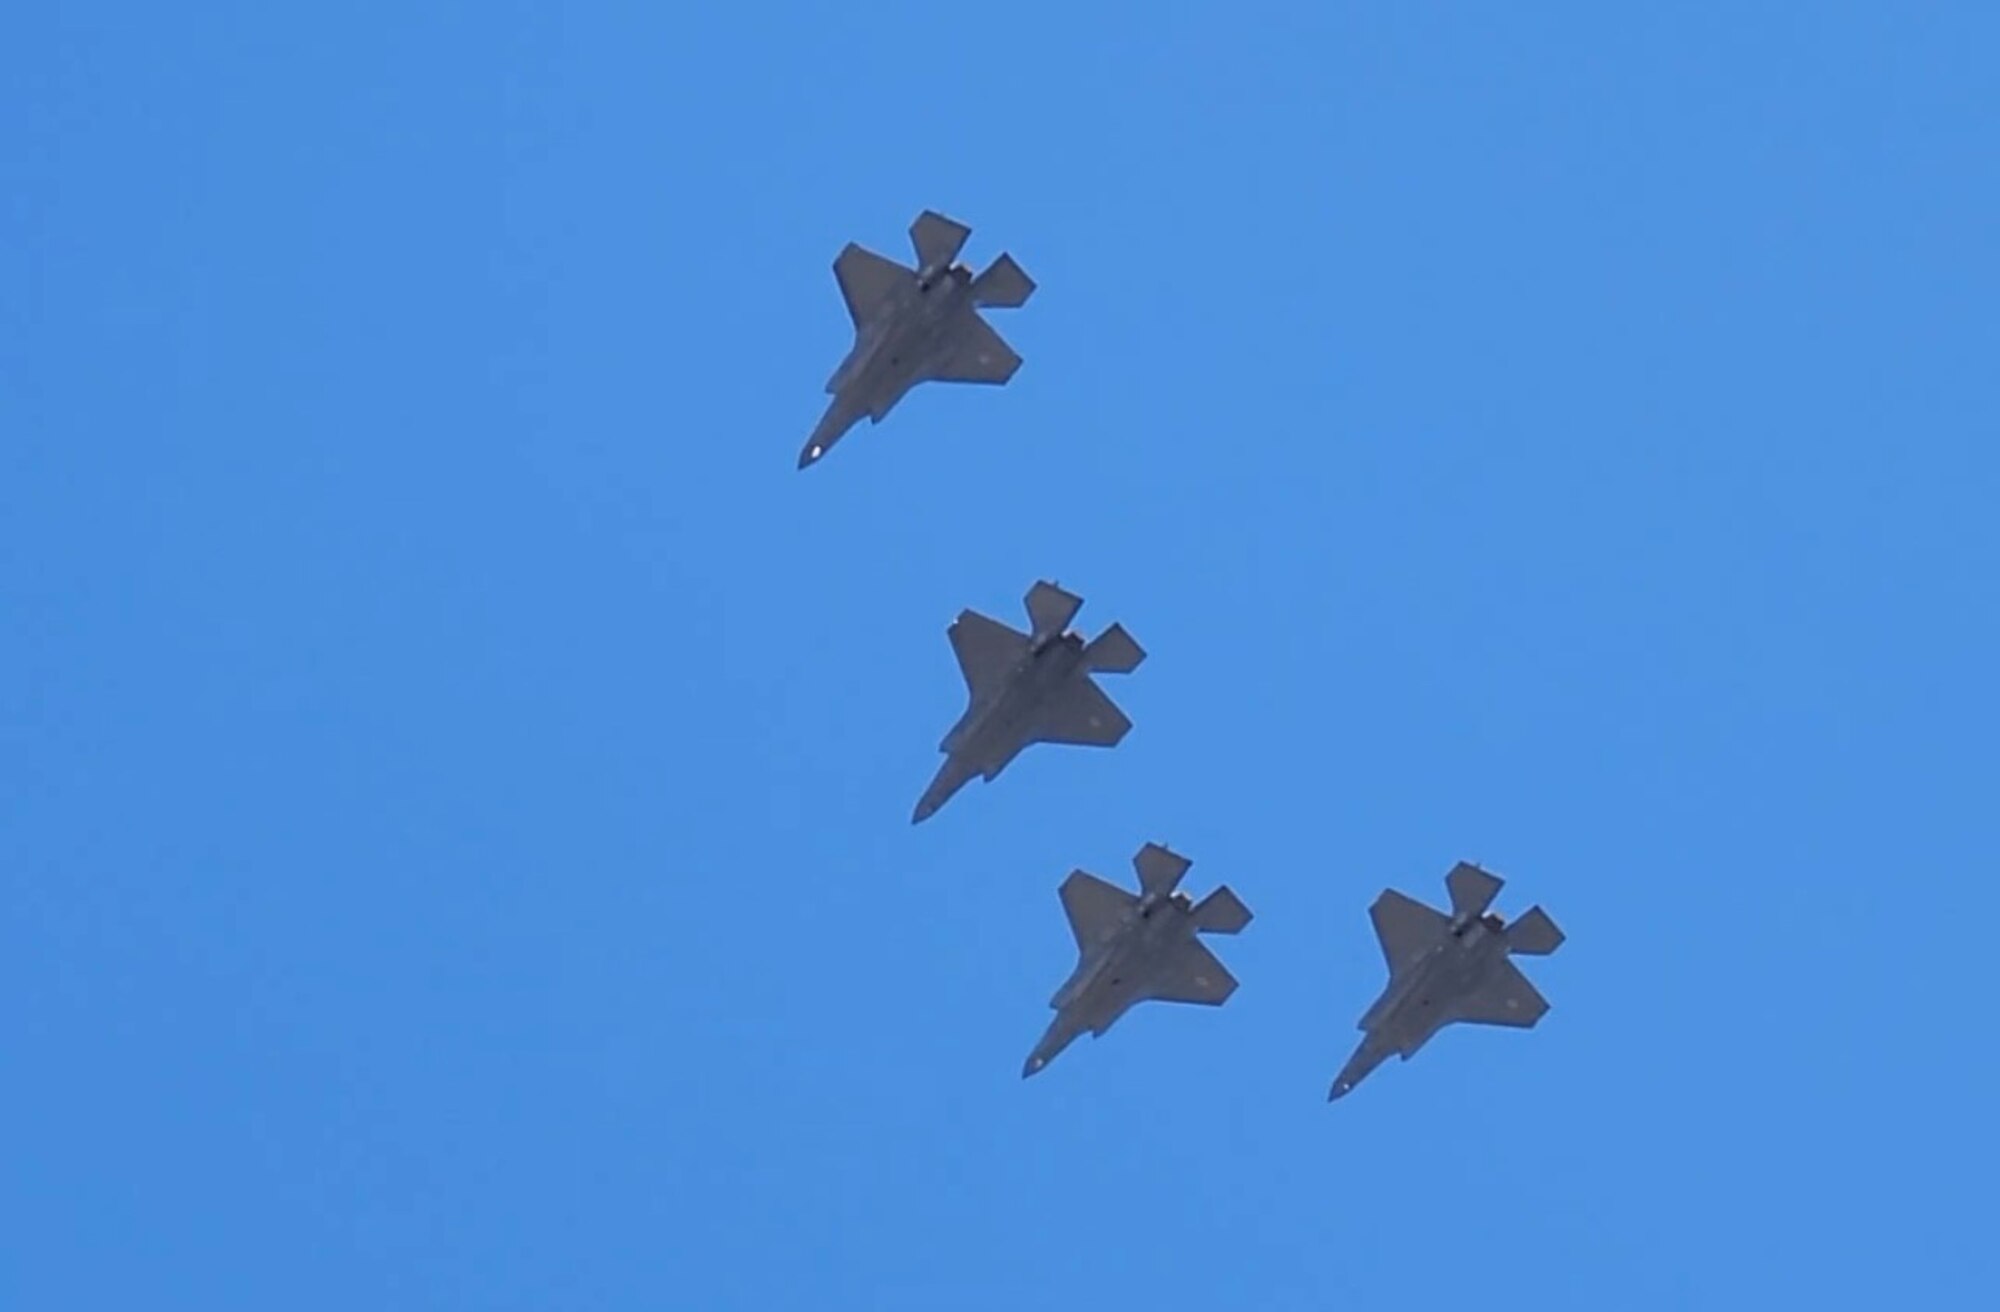 Four U.S. Air Force F-35A Lightning II aircraft flyover the 10 year memorial event for the Granite Mountain Hotshots at Prescott, Arizona, June 30, 2023.